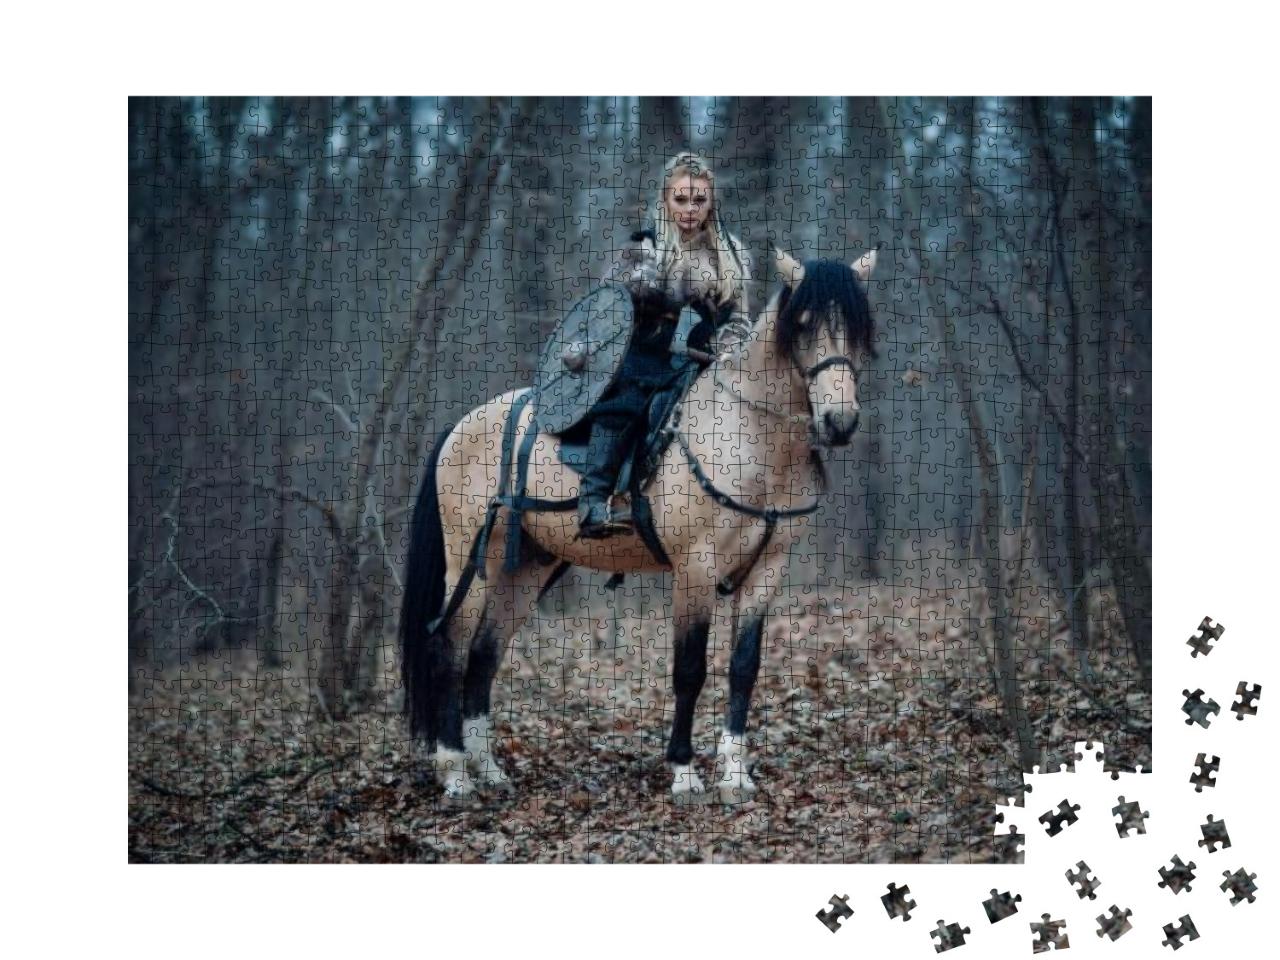 Viking Warrior Female Ridding a Horse At Twilight Autumn... Jigsaw Puzzle with 1000 pieces